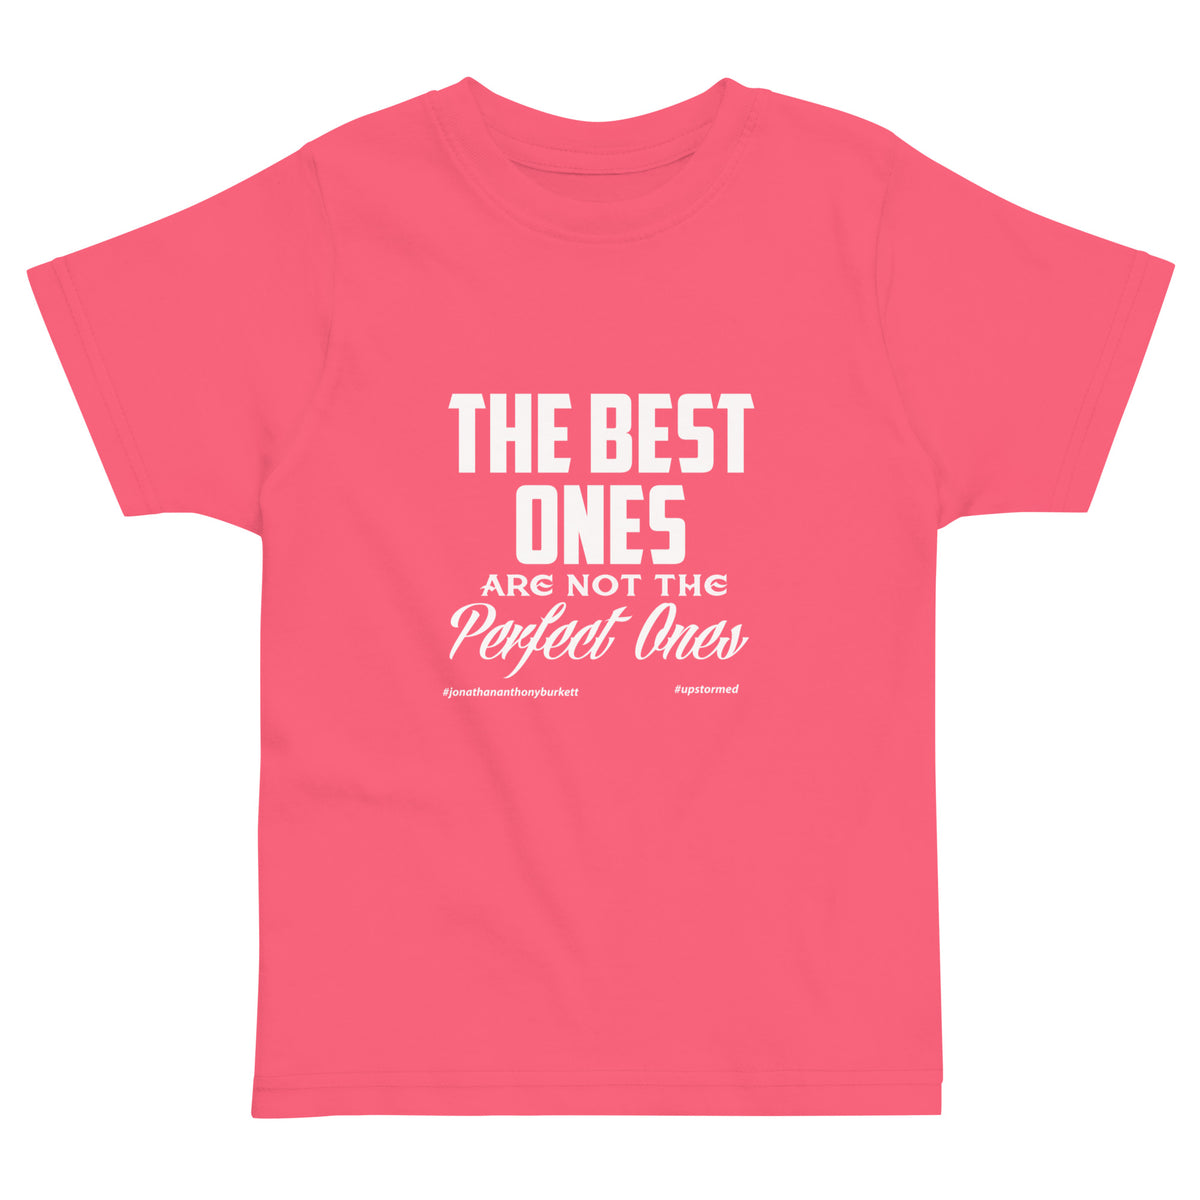 The Best Ones Are Not The Perfect Ones Upstormed Toddler T-Shirt